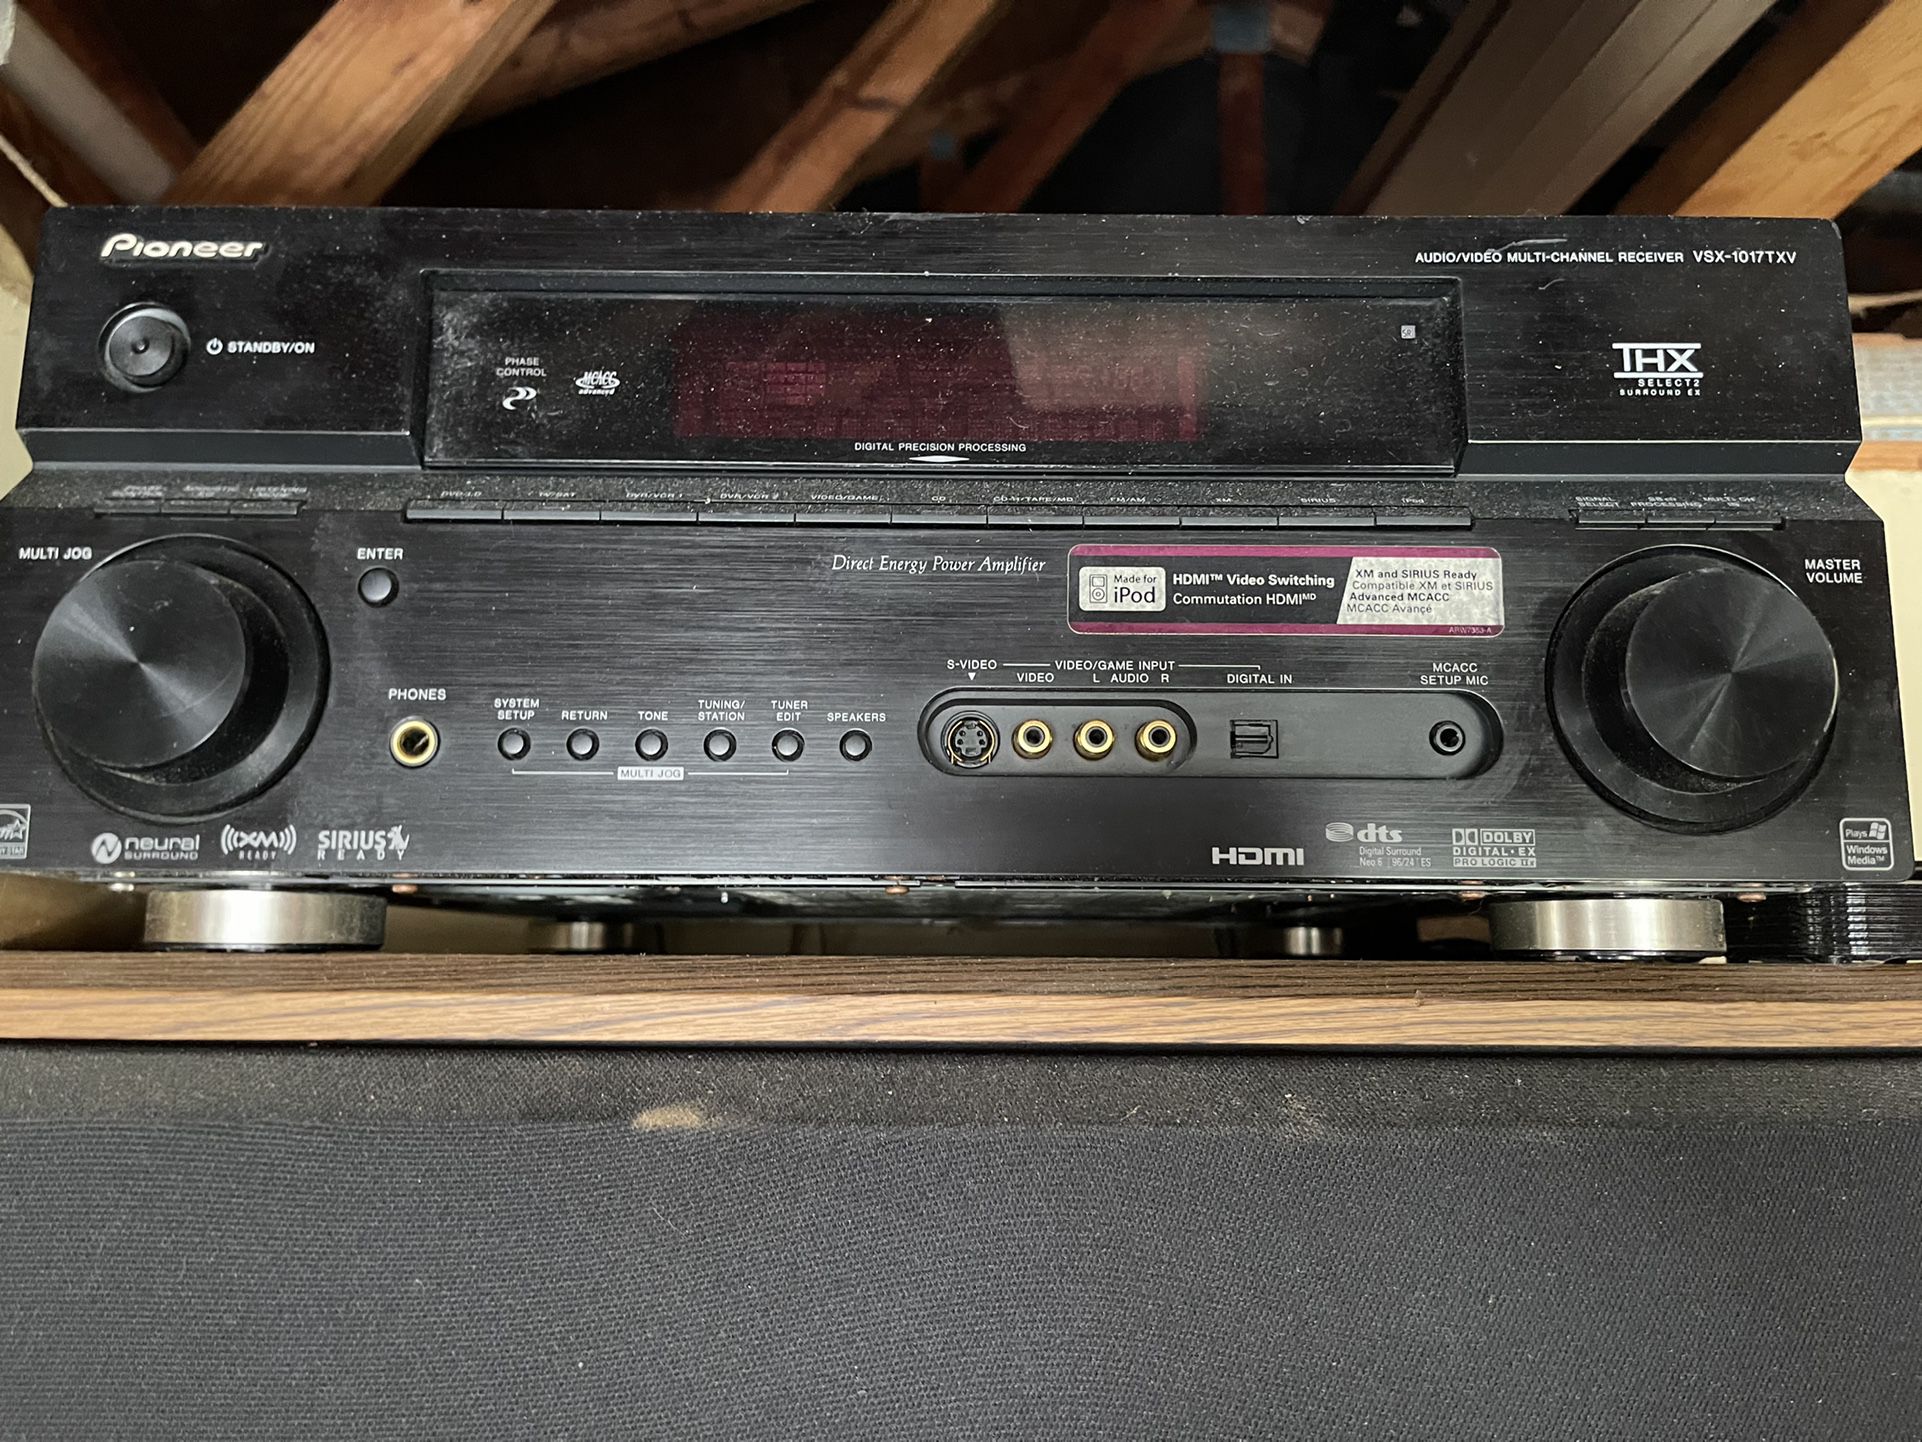 Pioneer receiver with two speakers and Bluetooth